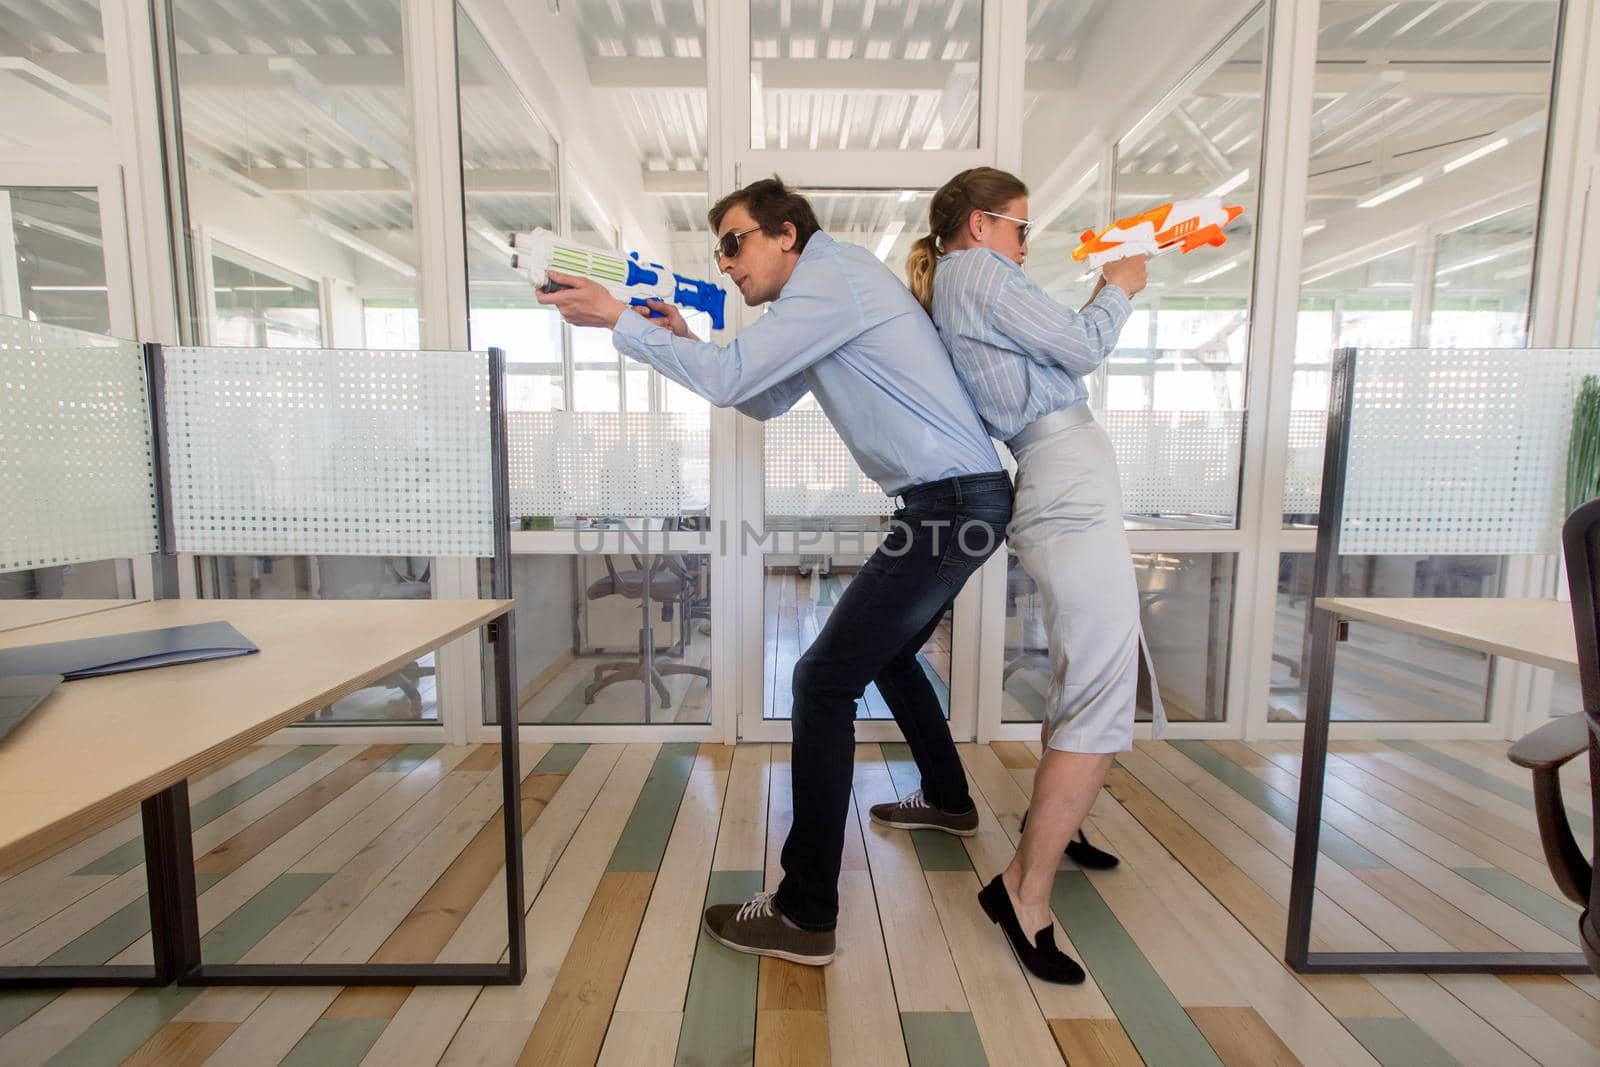 Colleagues with toy guns in office by Demkat